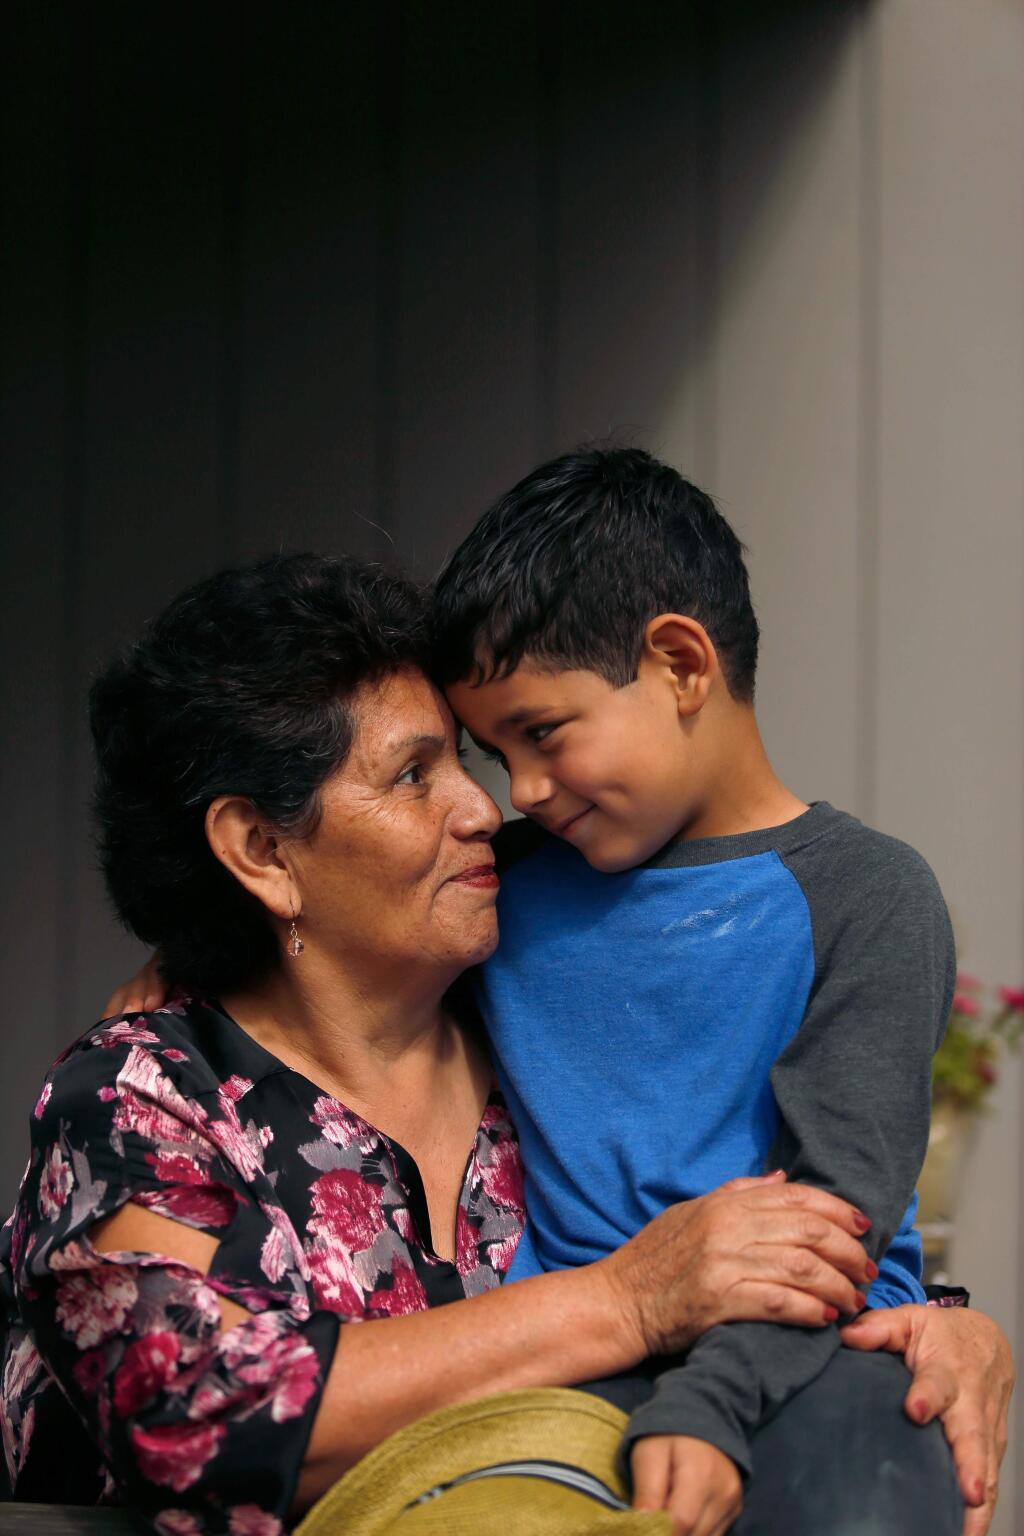 Rosa Mendoza, 60, smiles with her grandson Diego Camargo, 6, at their home, where multiple generations of the tight-knit Mendoza family live under one roof, in Cotati, California on Thursday, April 21, 2016. (Alvin Jornada / The Press Democrat)